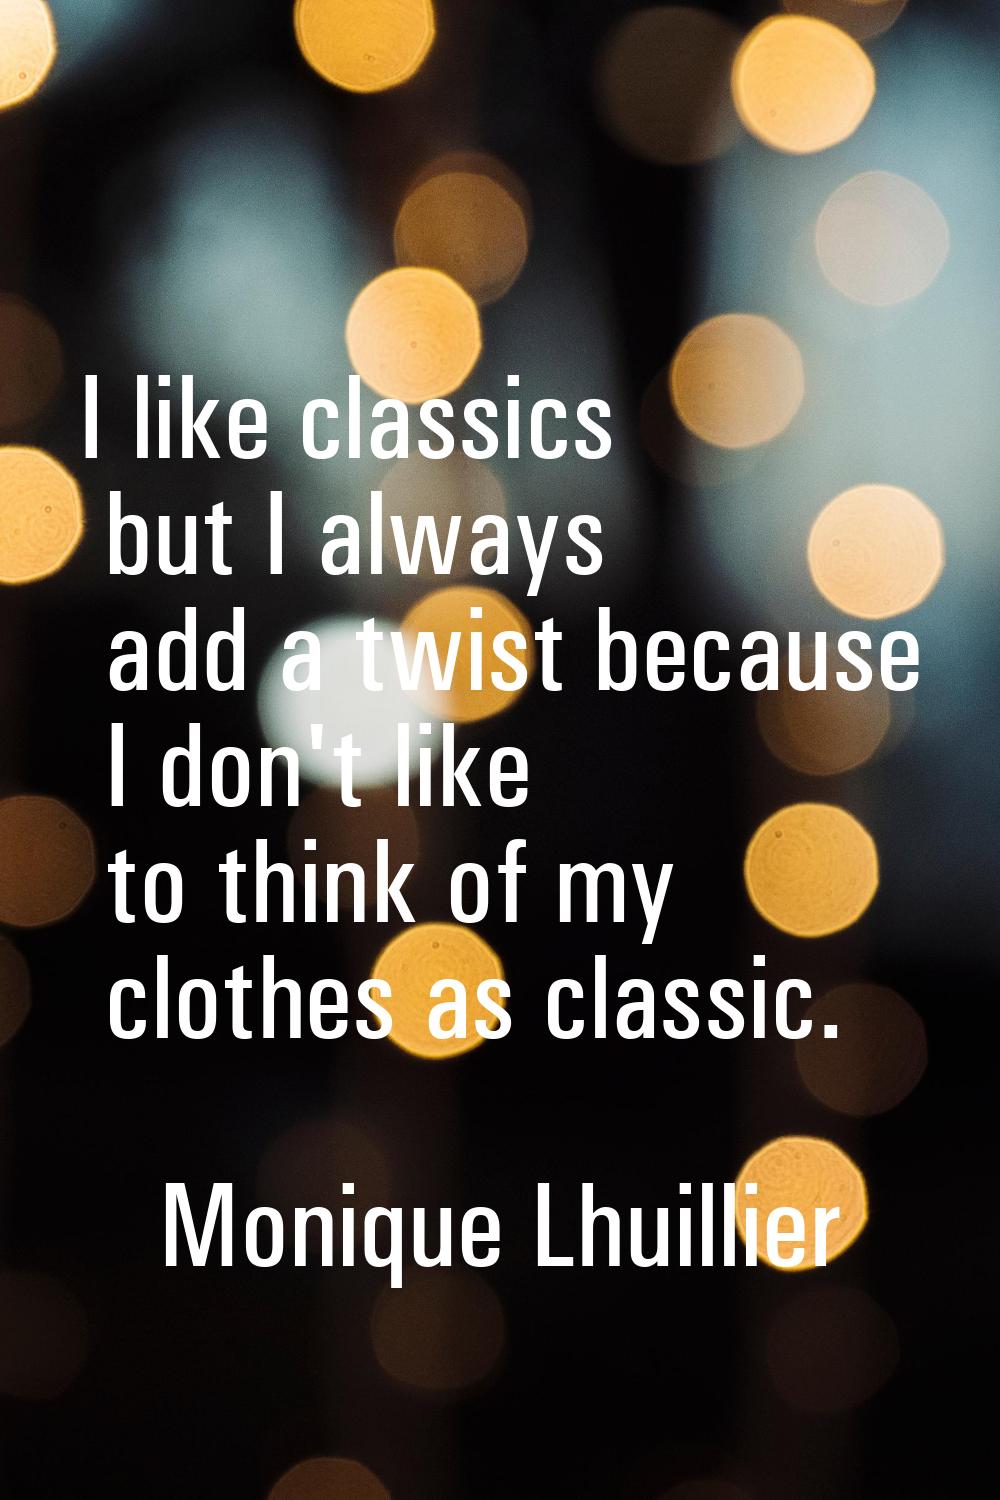 I like classics but I always add a twist because I don't like to think of my clothes as classic.